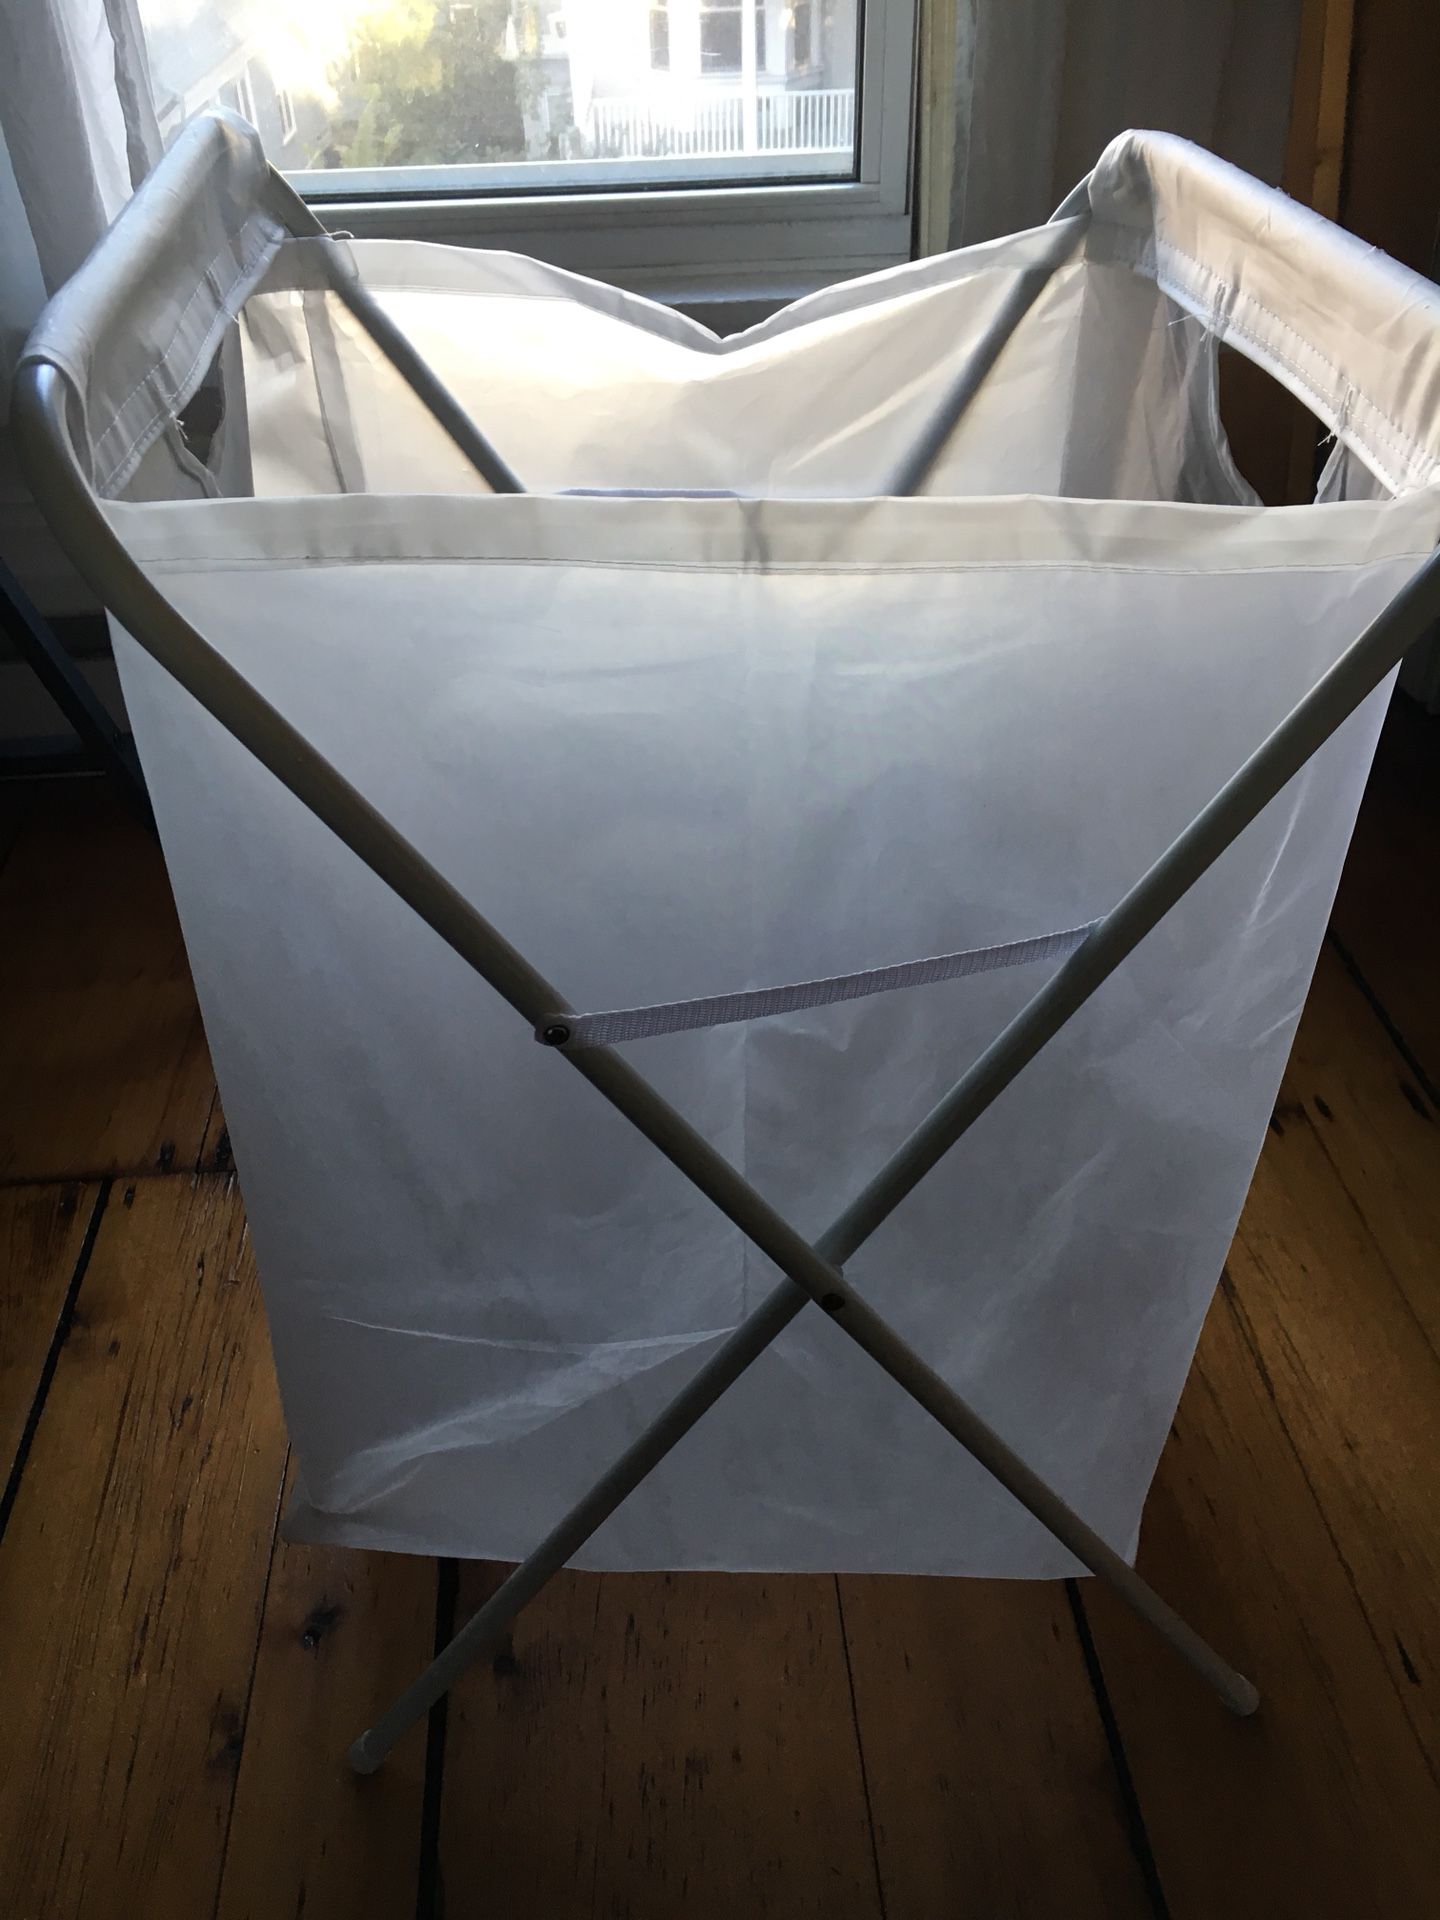 JÄLL Laundry bag with stand, white, 13 gallon - IKEA